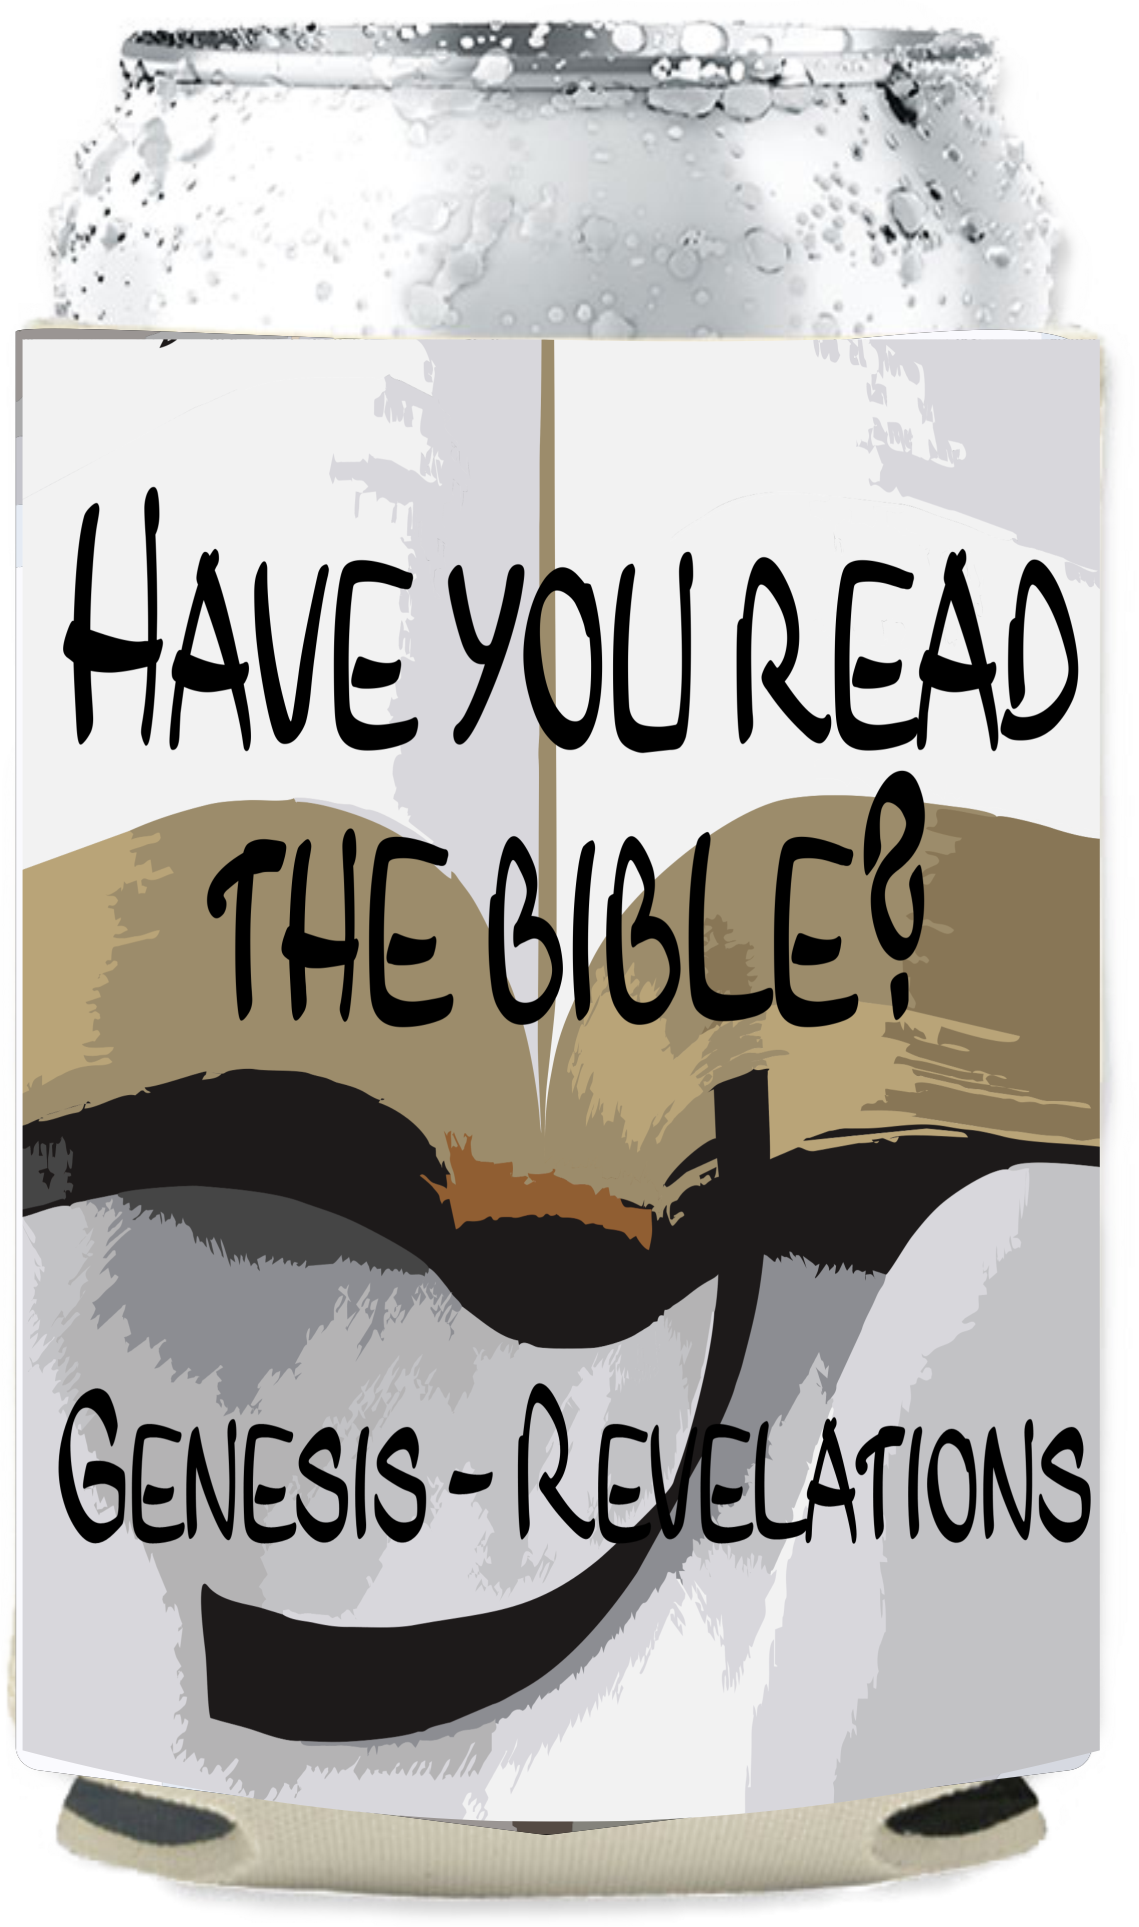 Have you read the bible?